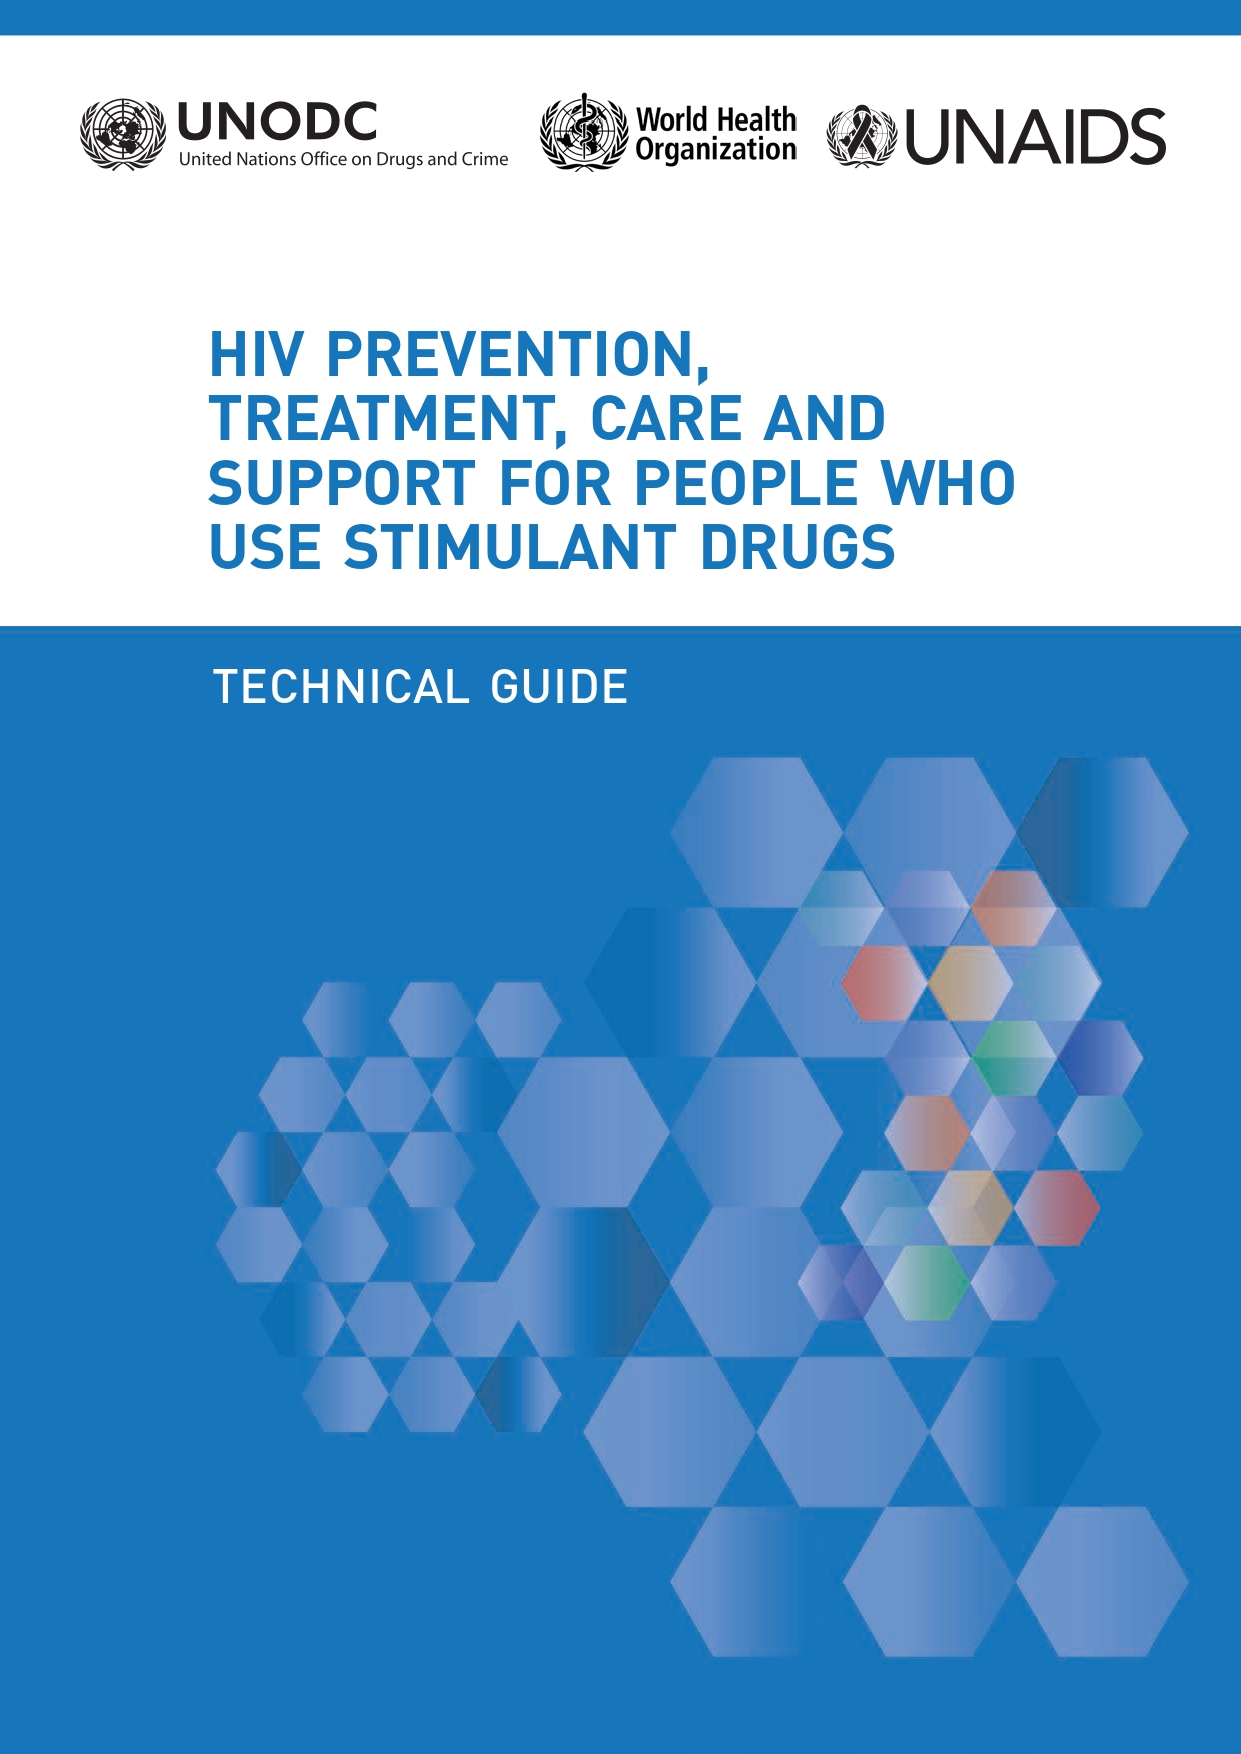 Protocol on Assessing Drug Use and HIV in Prison Settings 